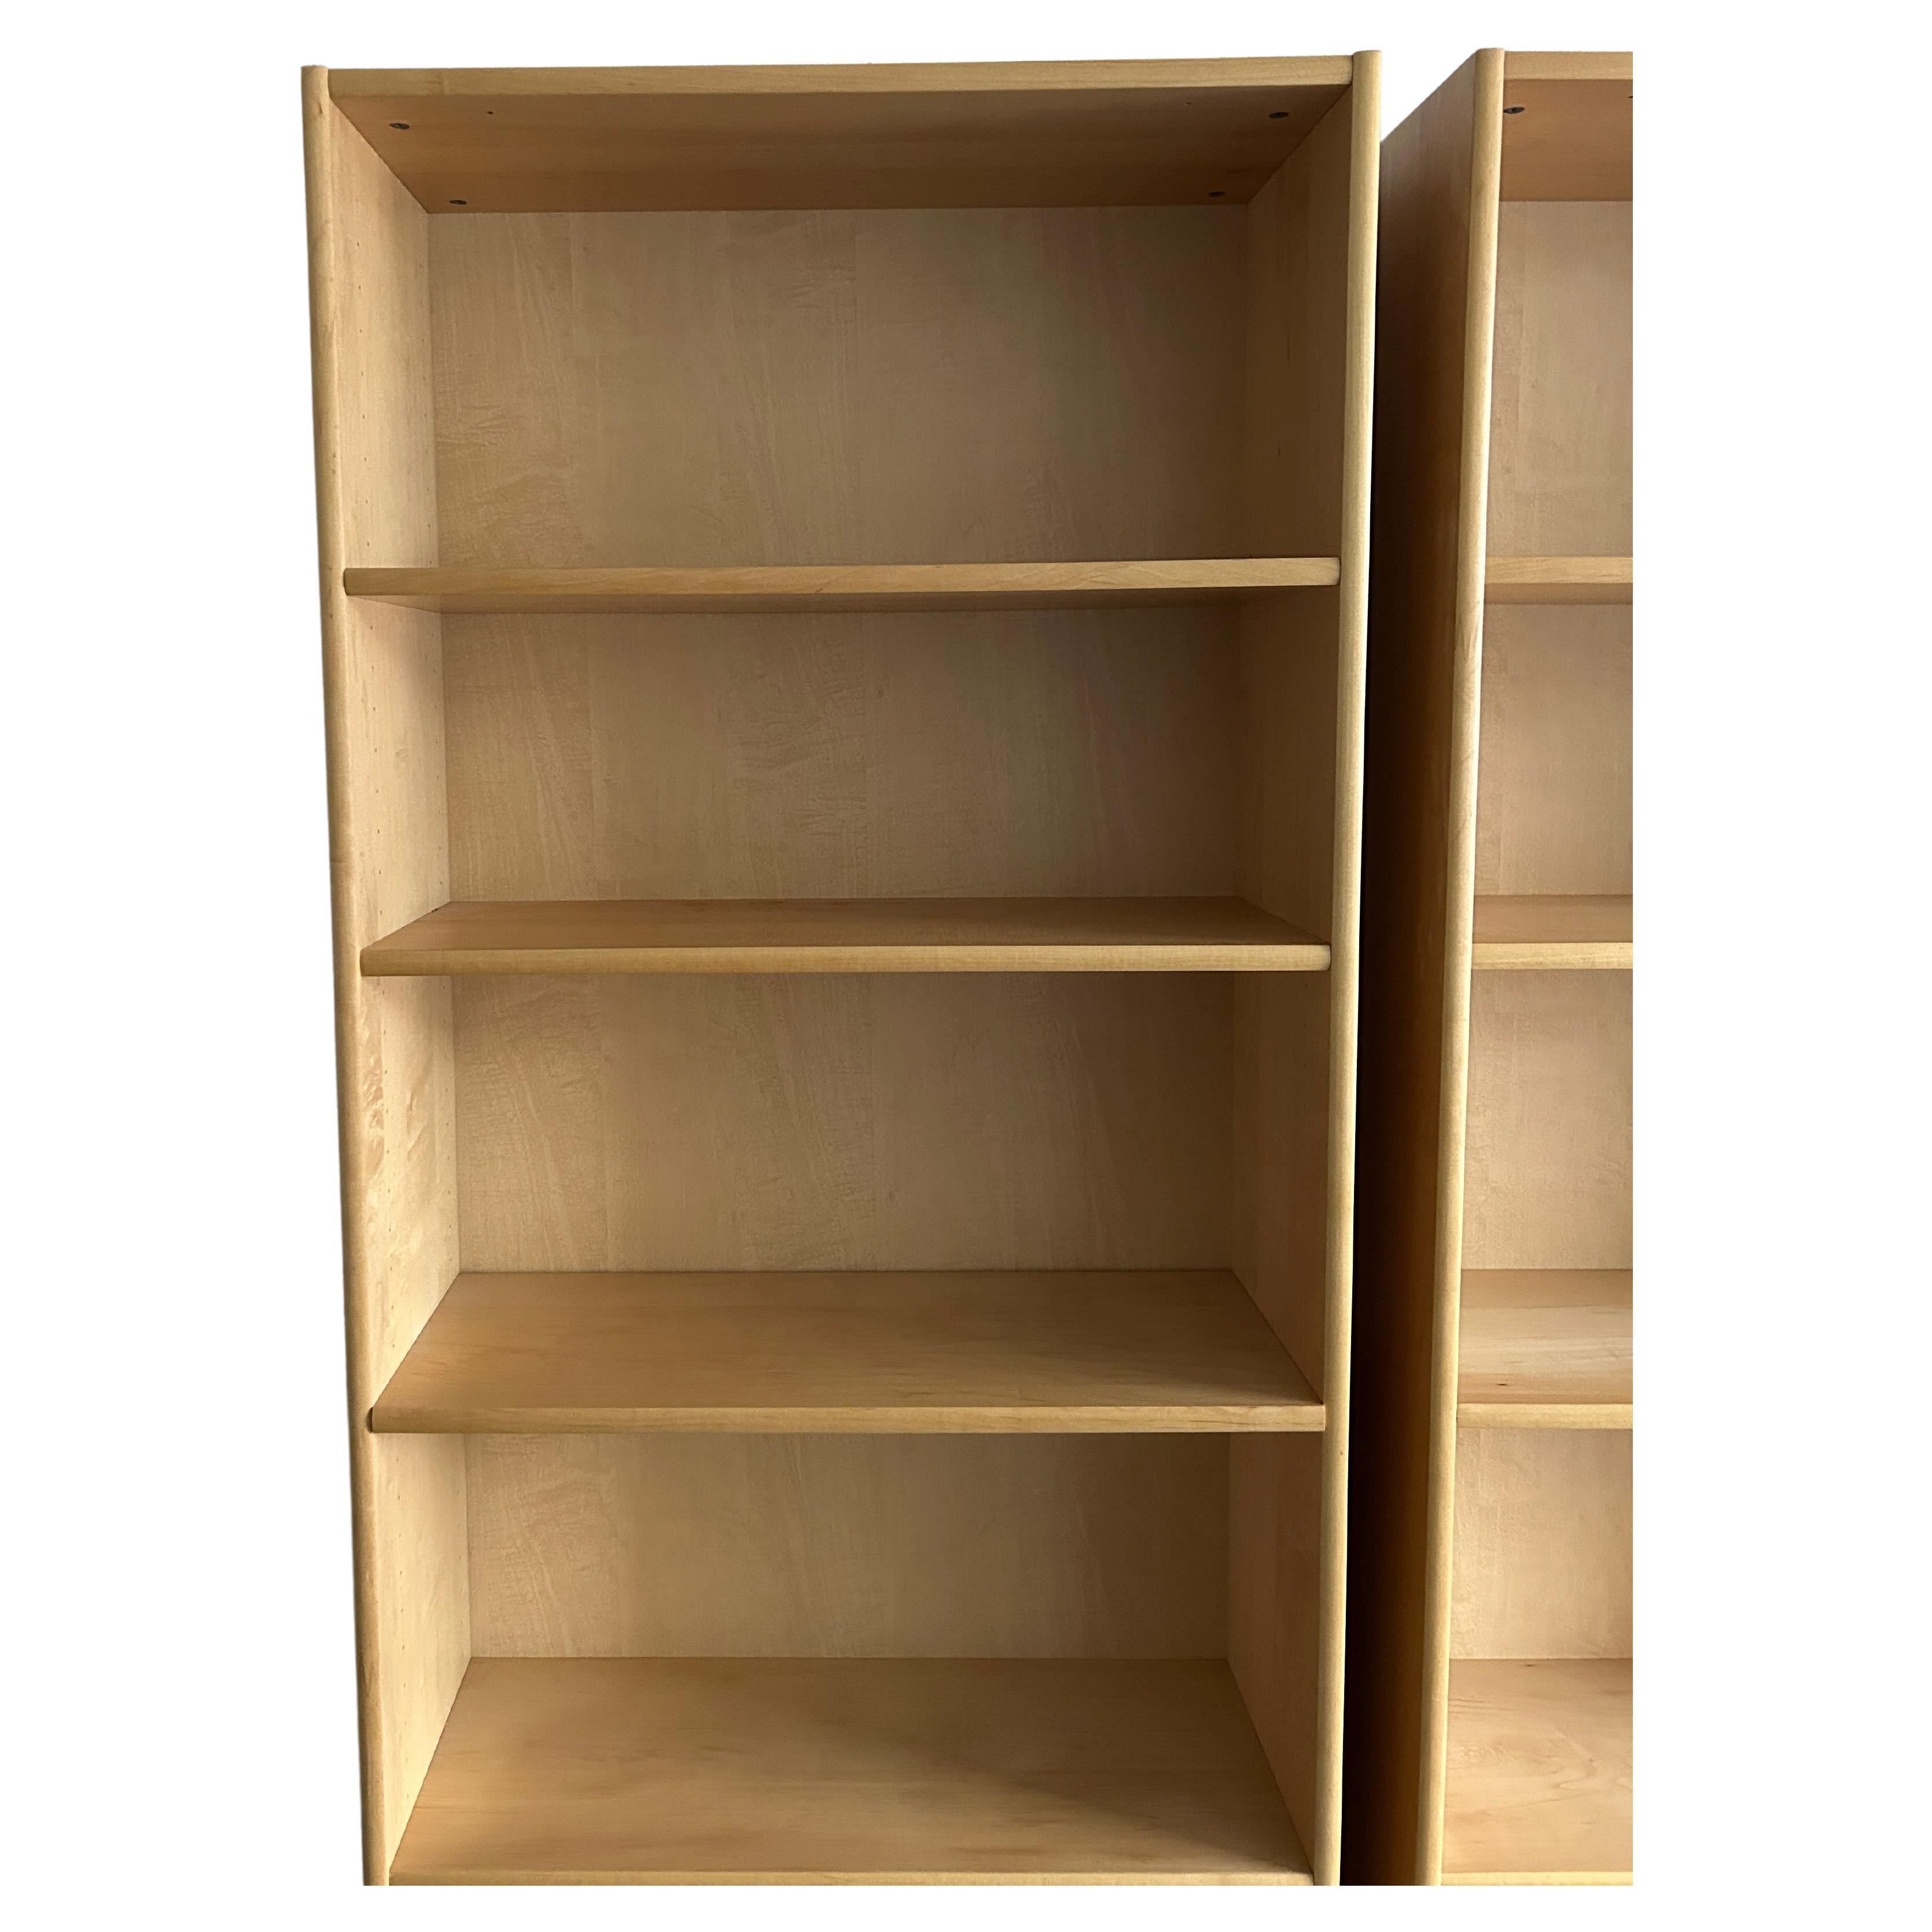 Pair of Mid century Scandinavian Modern blonde birch wood shelf wall unit or open bookcases. Very modern design and well built. Made of birch veneer plywood shelves and structural. Very solid bookcases 3 shelves adjust in each unit. Made in Denmark.